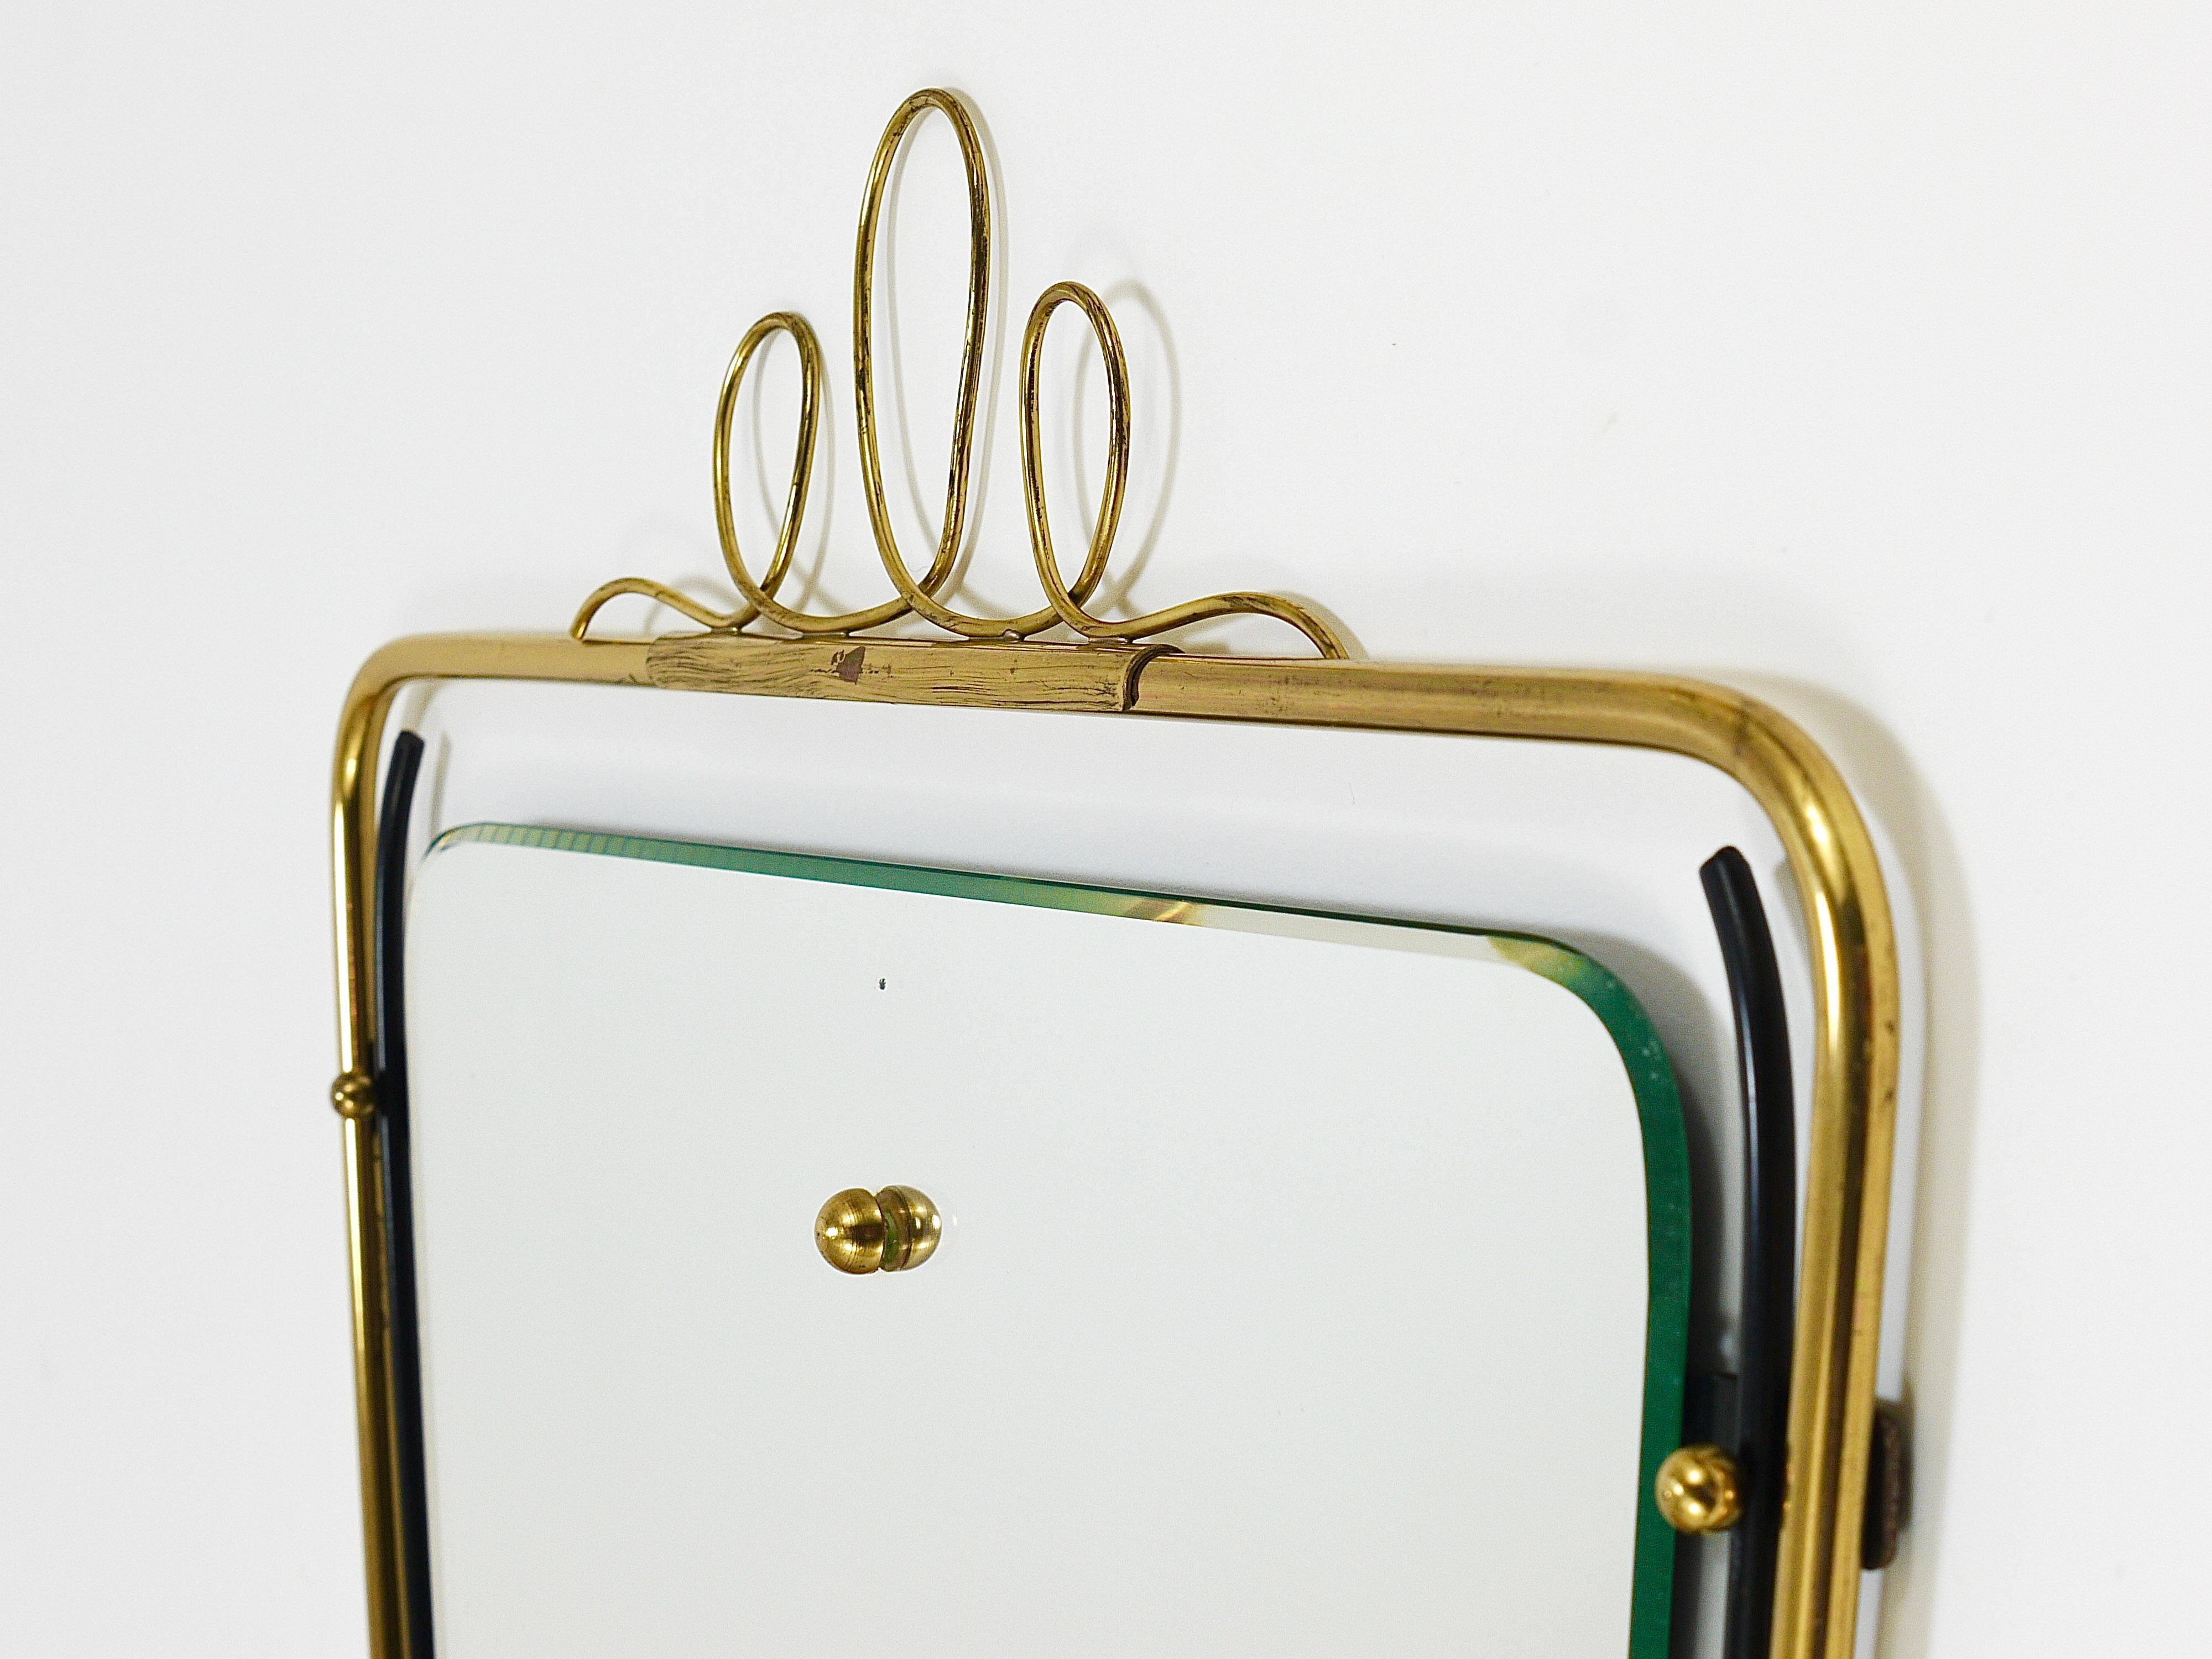 A lovely square Italian midcentury vintage brass loop wall mirror from the 1950s. Its frame is made of black metal and brass with a charming decorative crown on its top and other beautiful brass details. In very good condition with marginal patina